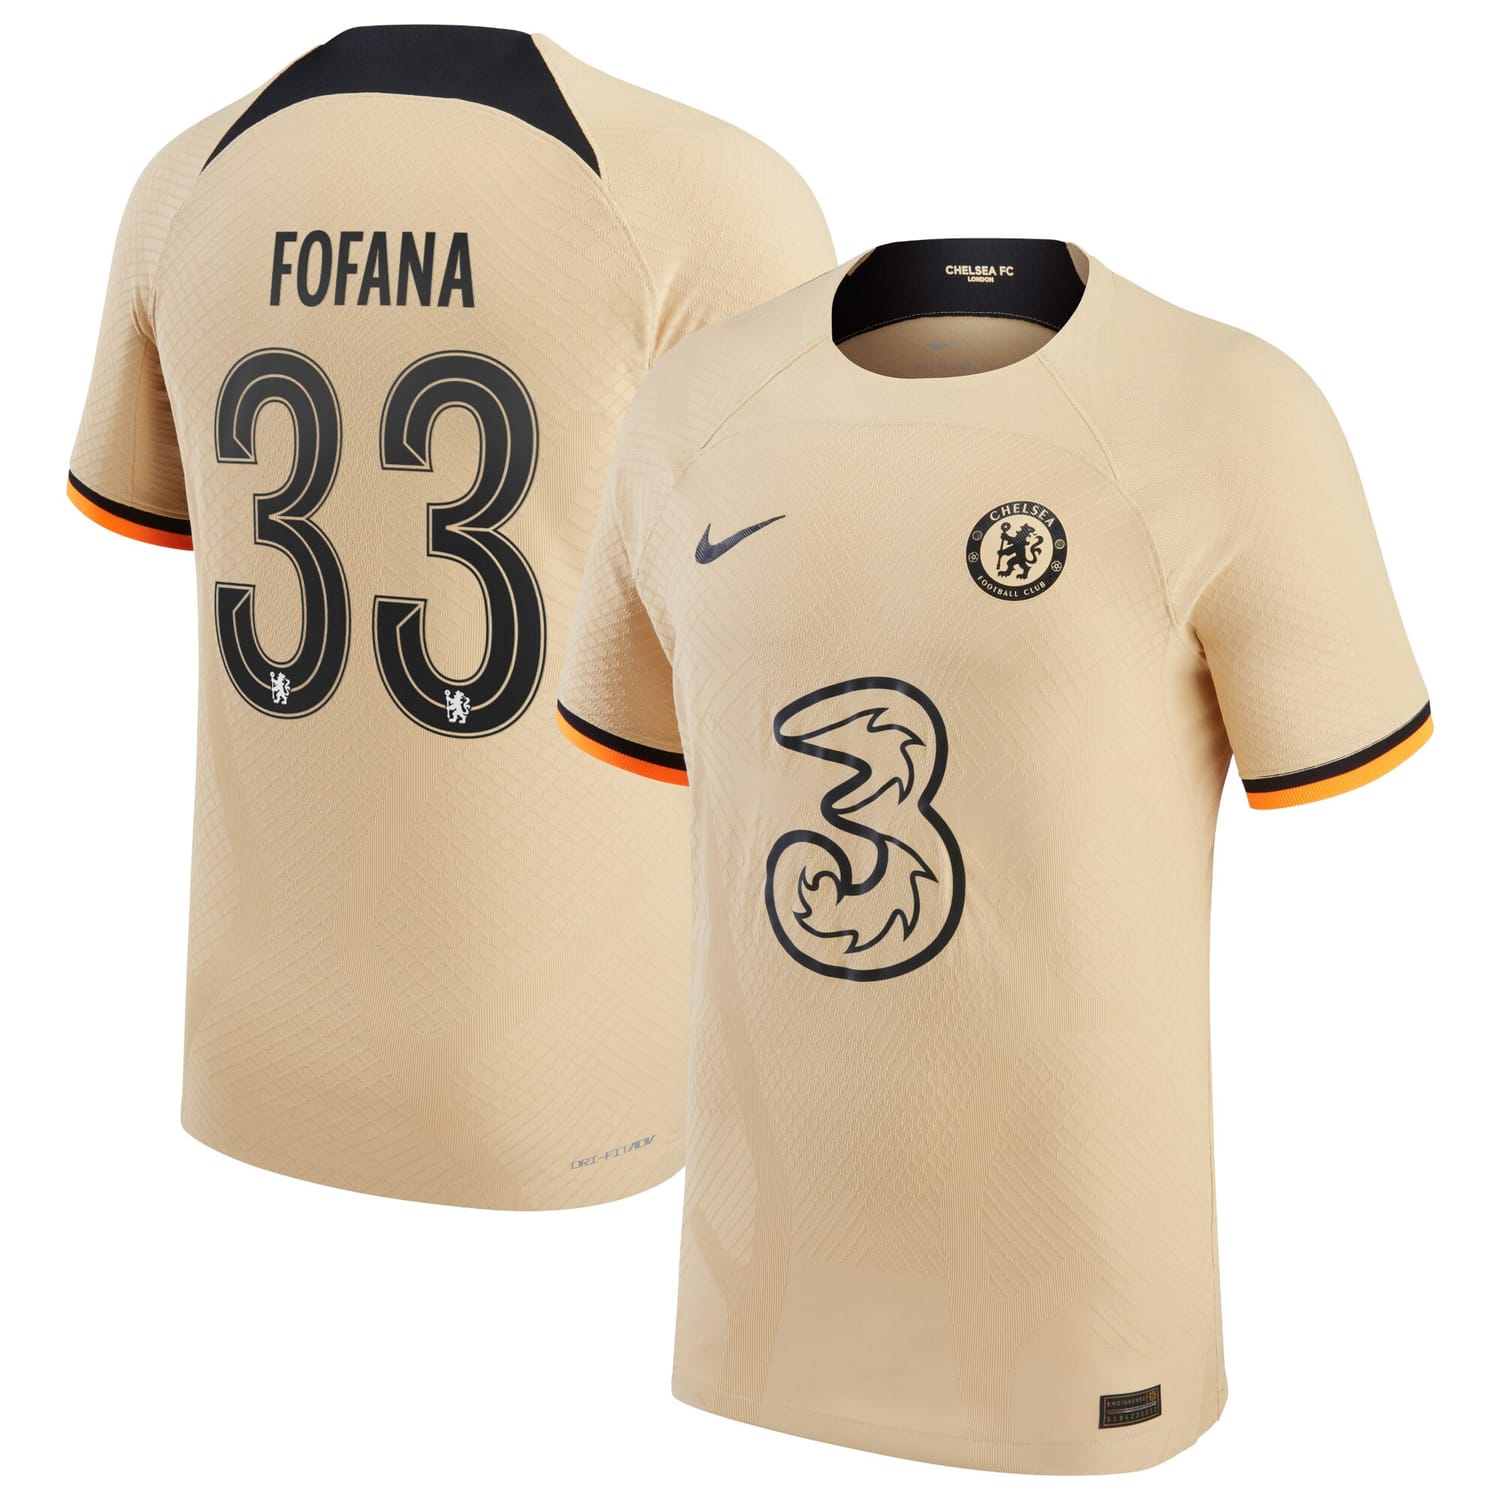 Premier League Chelsea Third Cup Authentic Jersey Shirt 2022-23 player Wesley Fofana 33 printing for Men